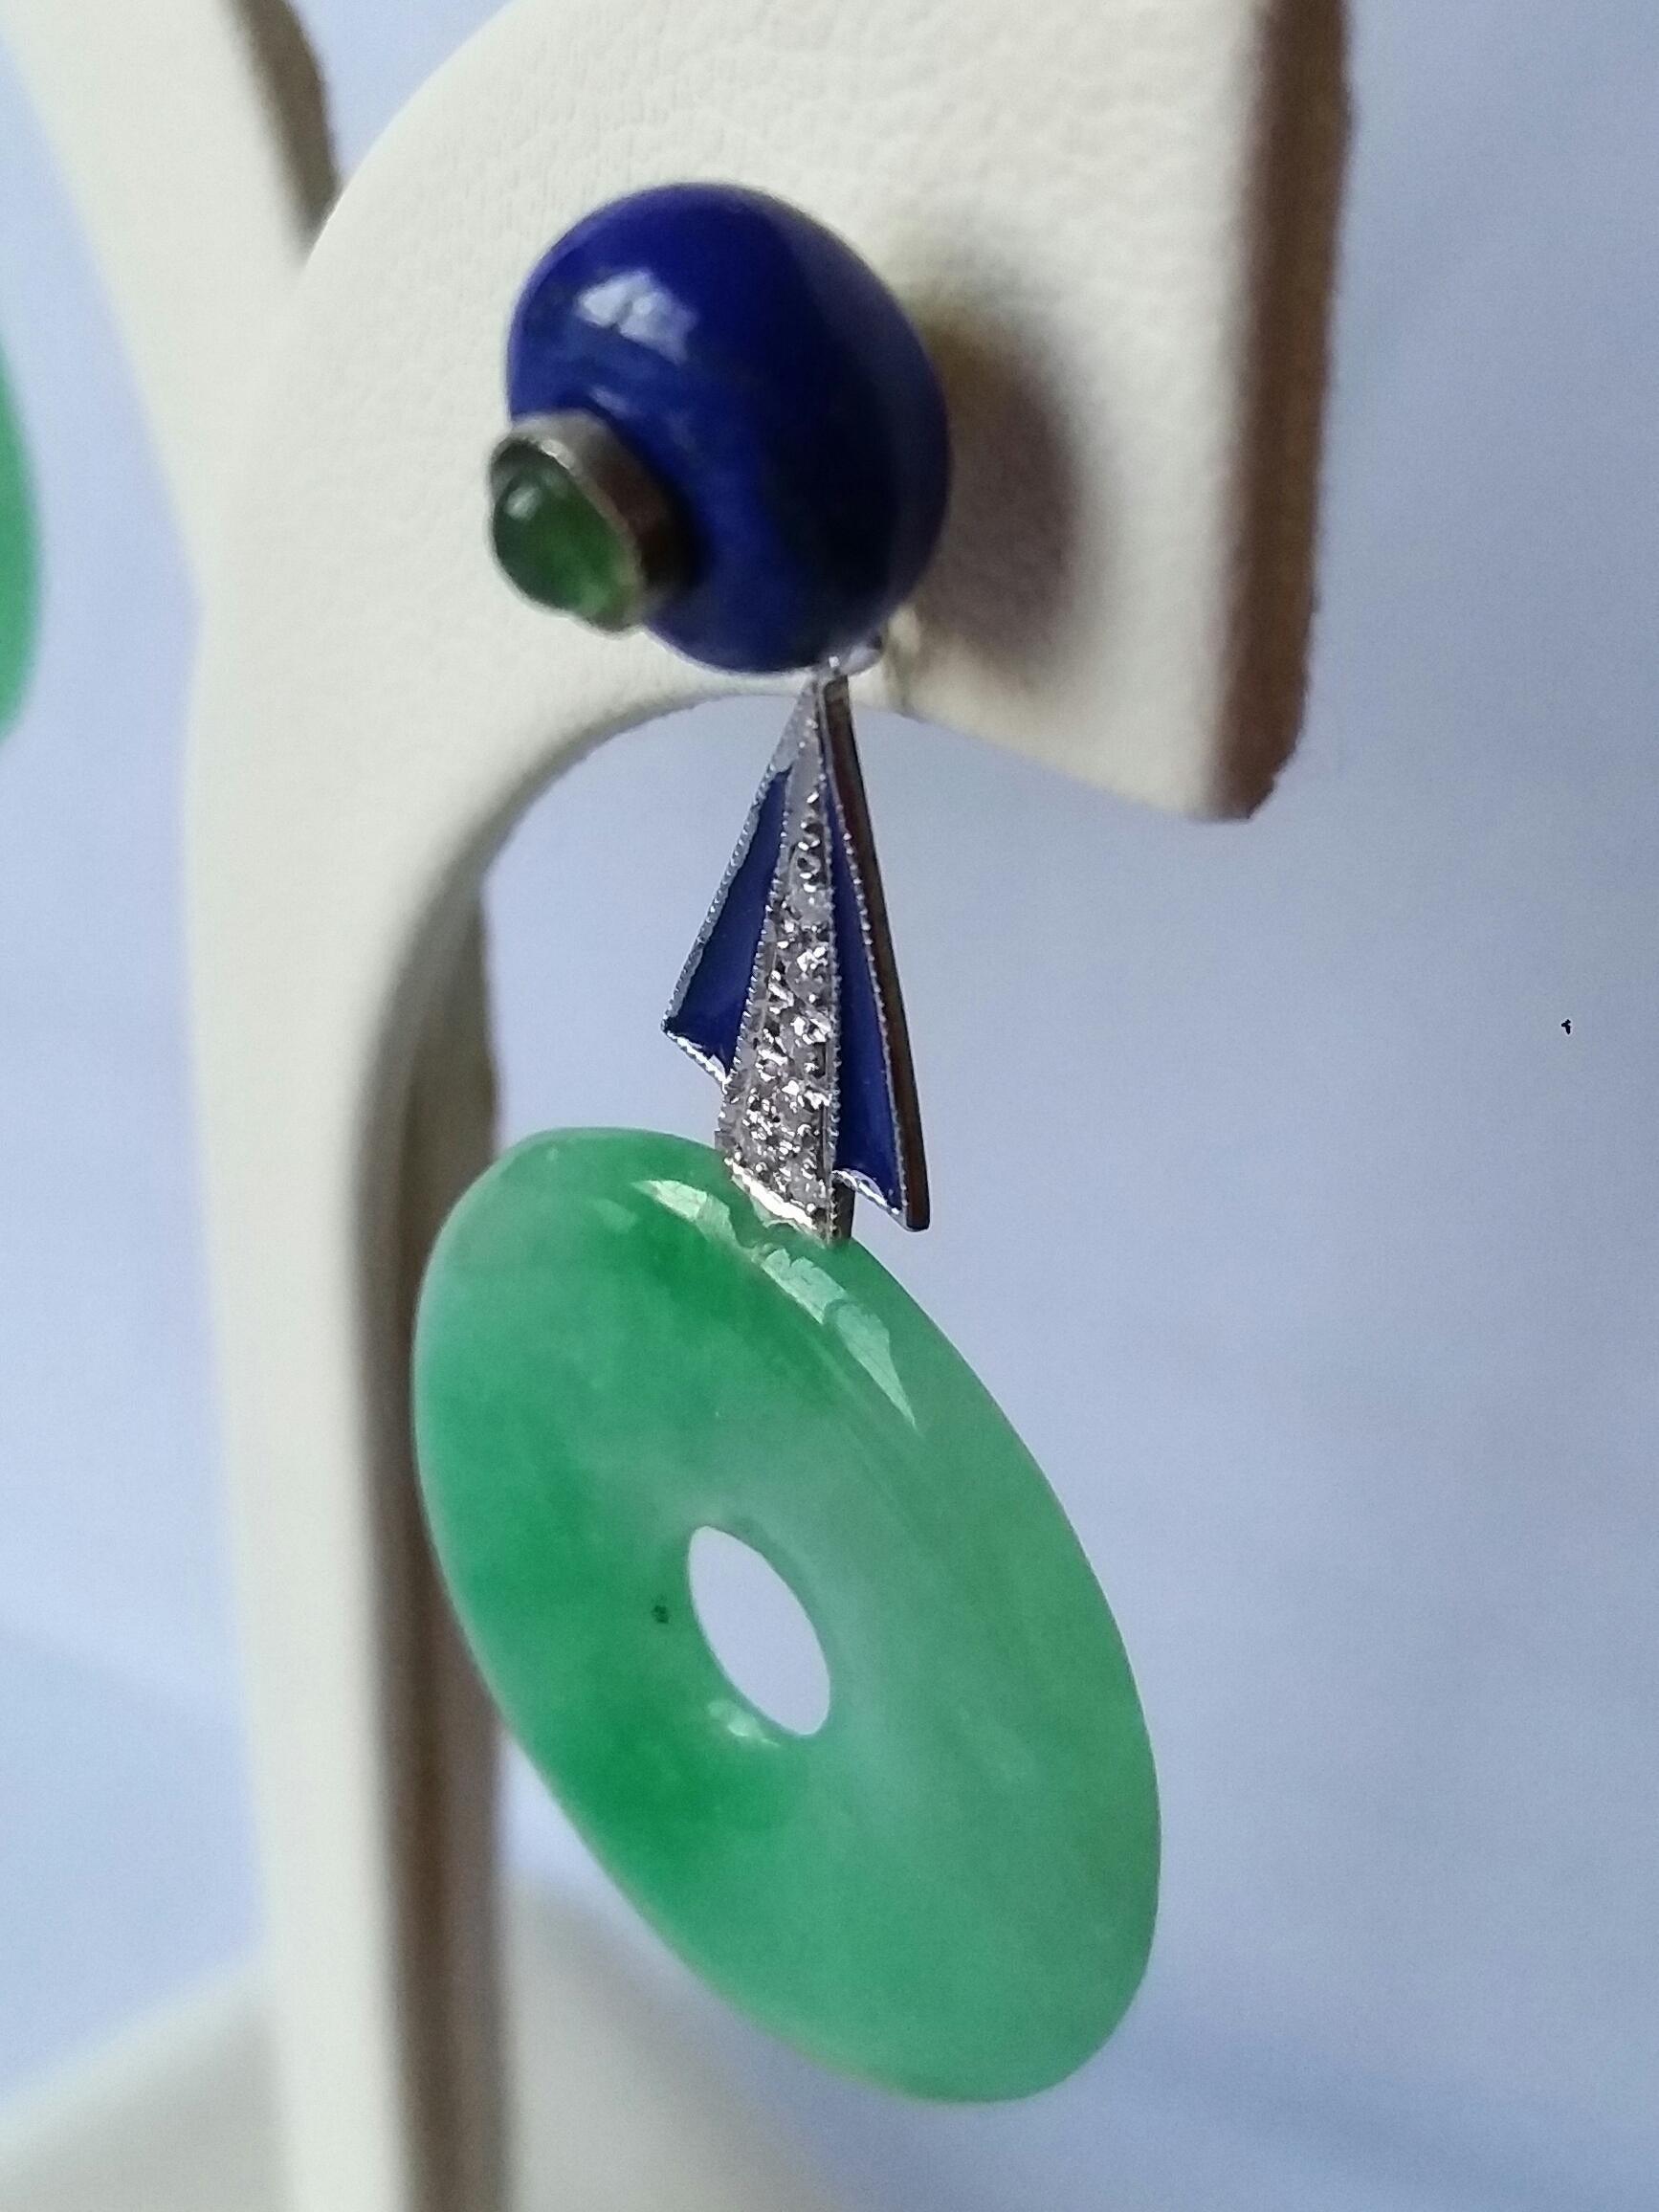 Tops are 2 round Lapis Lazuli buttons with a small round emerald cabochon in the center , middle parts in white gold,small full cut round diamonds and blue enamel , bottom parts are 2 plain Burma Jade donuts. 

In 1978 our workshop started in Italy